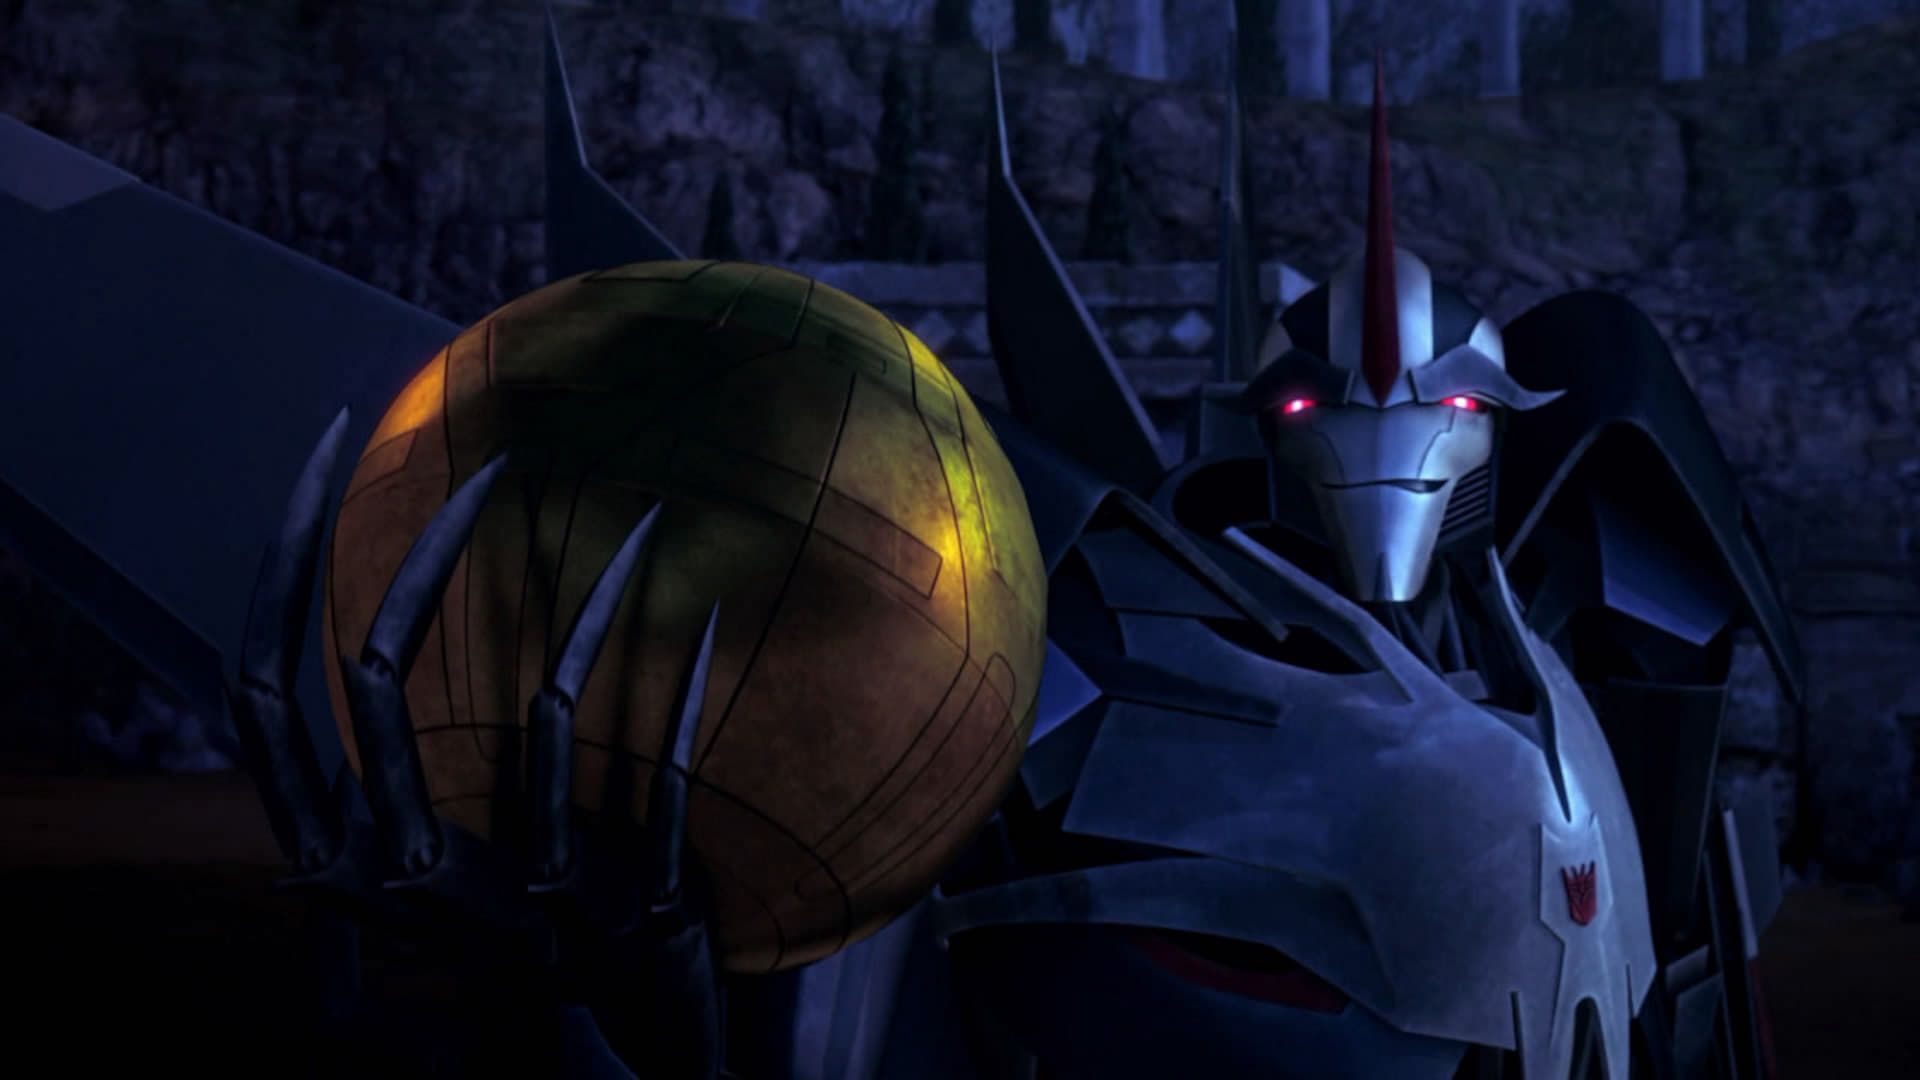 Transformers Prime background